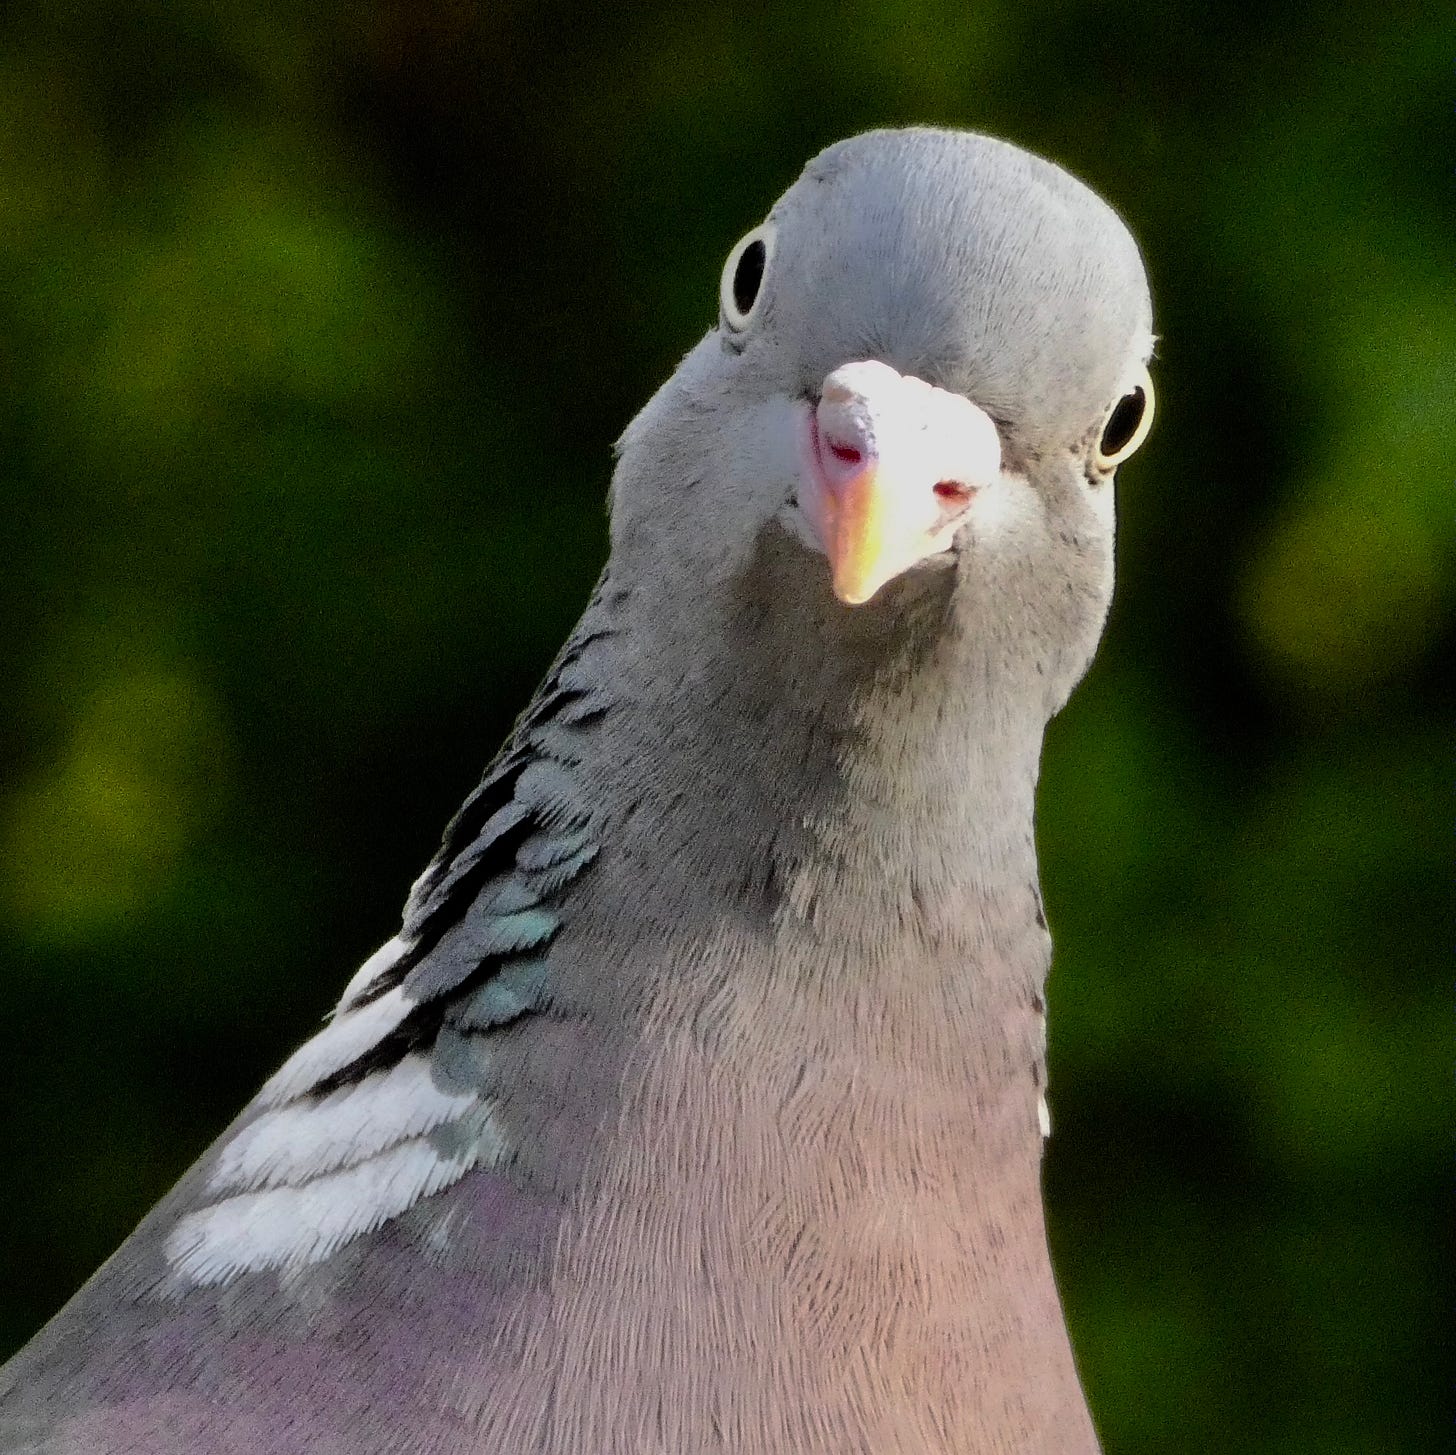 Close up of the head and upper breast of a Wood pigeon, looking quizzically at the camera.